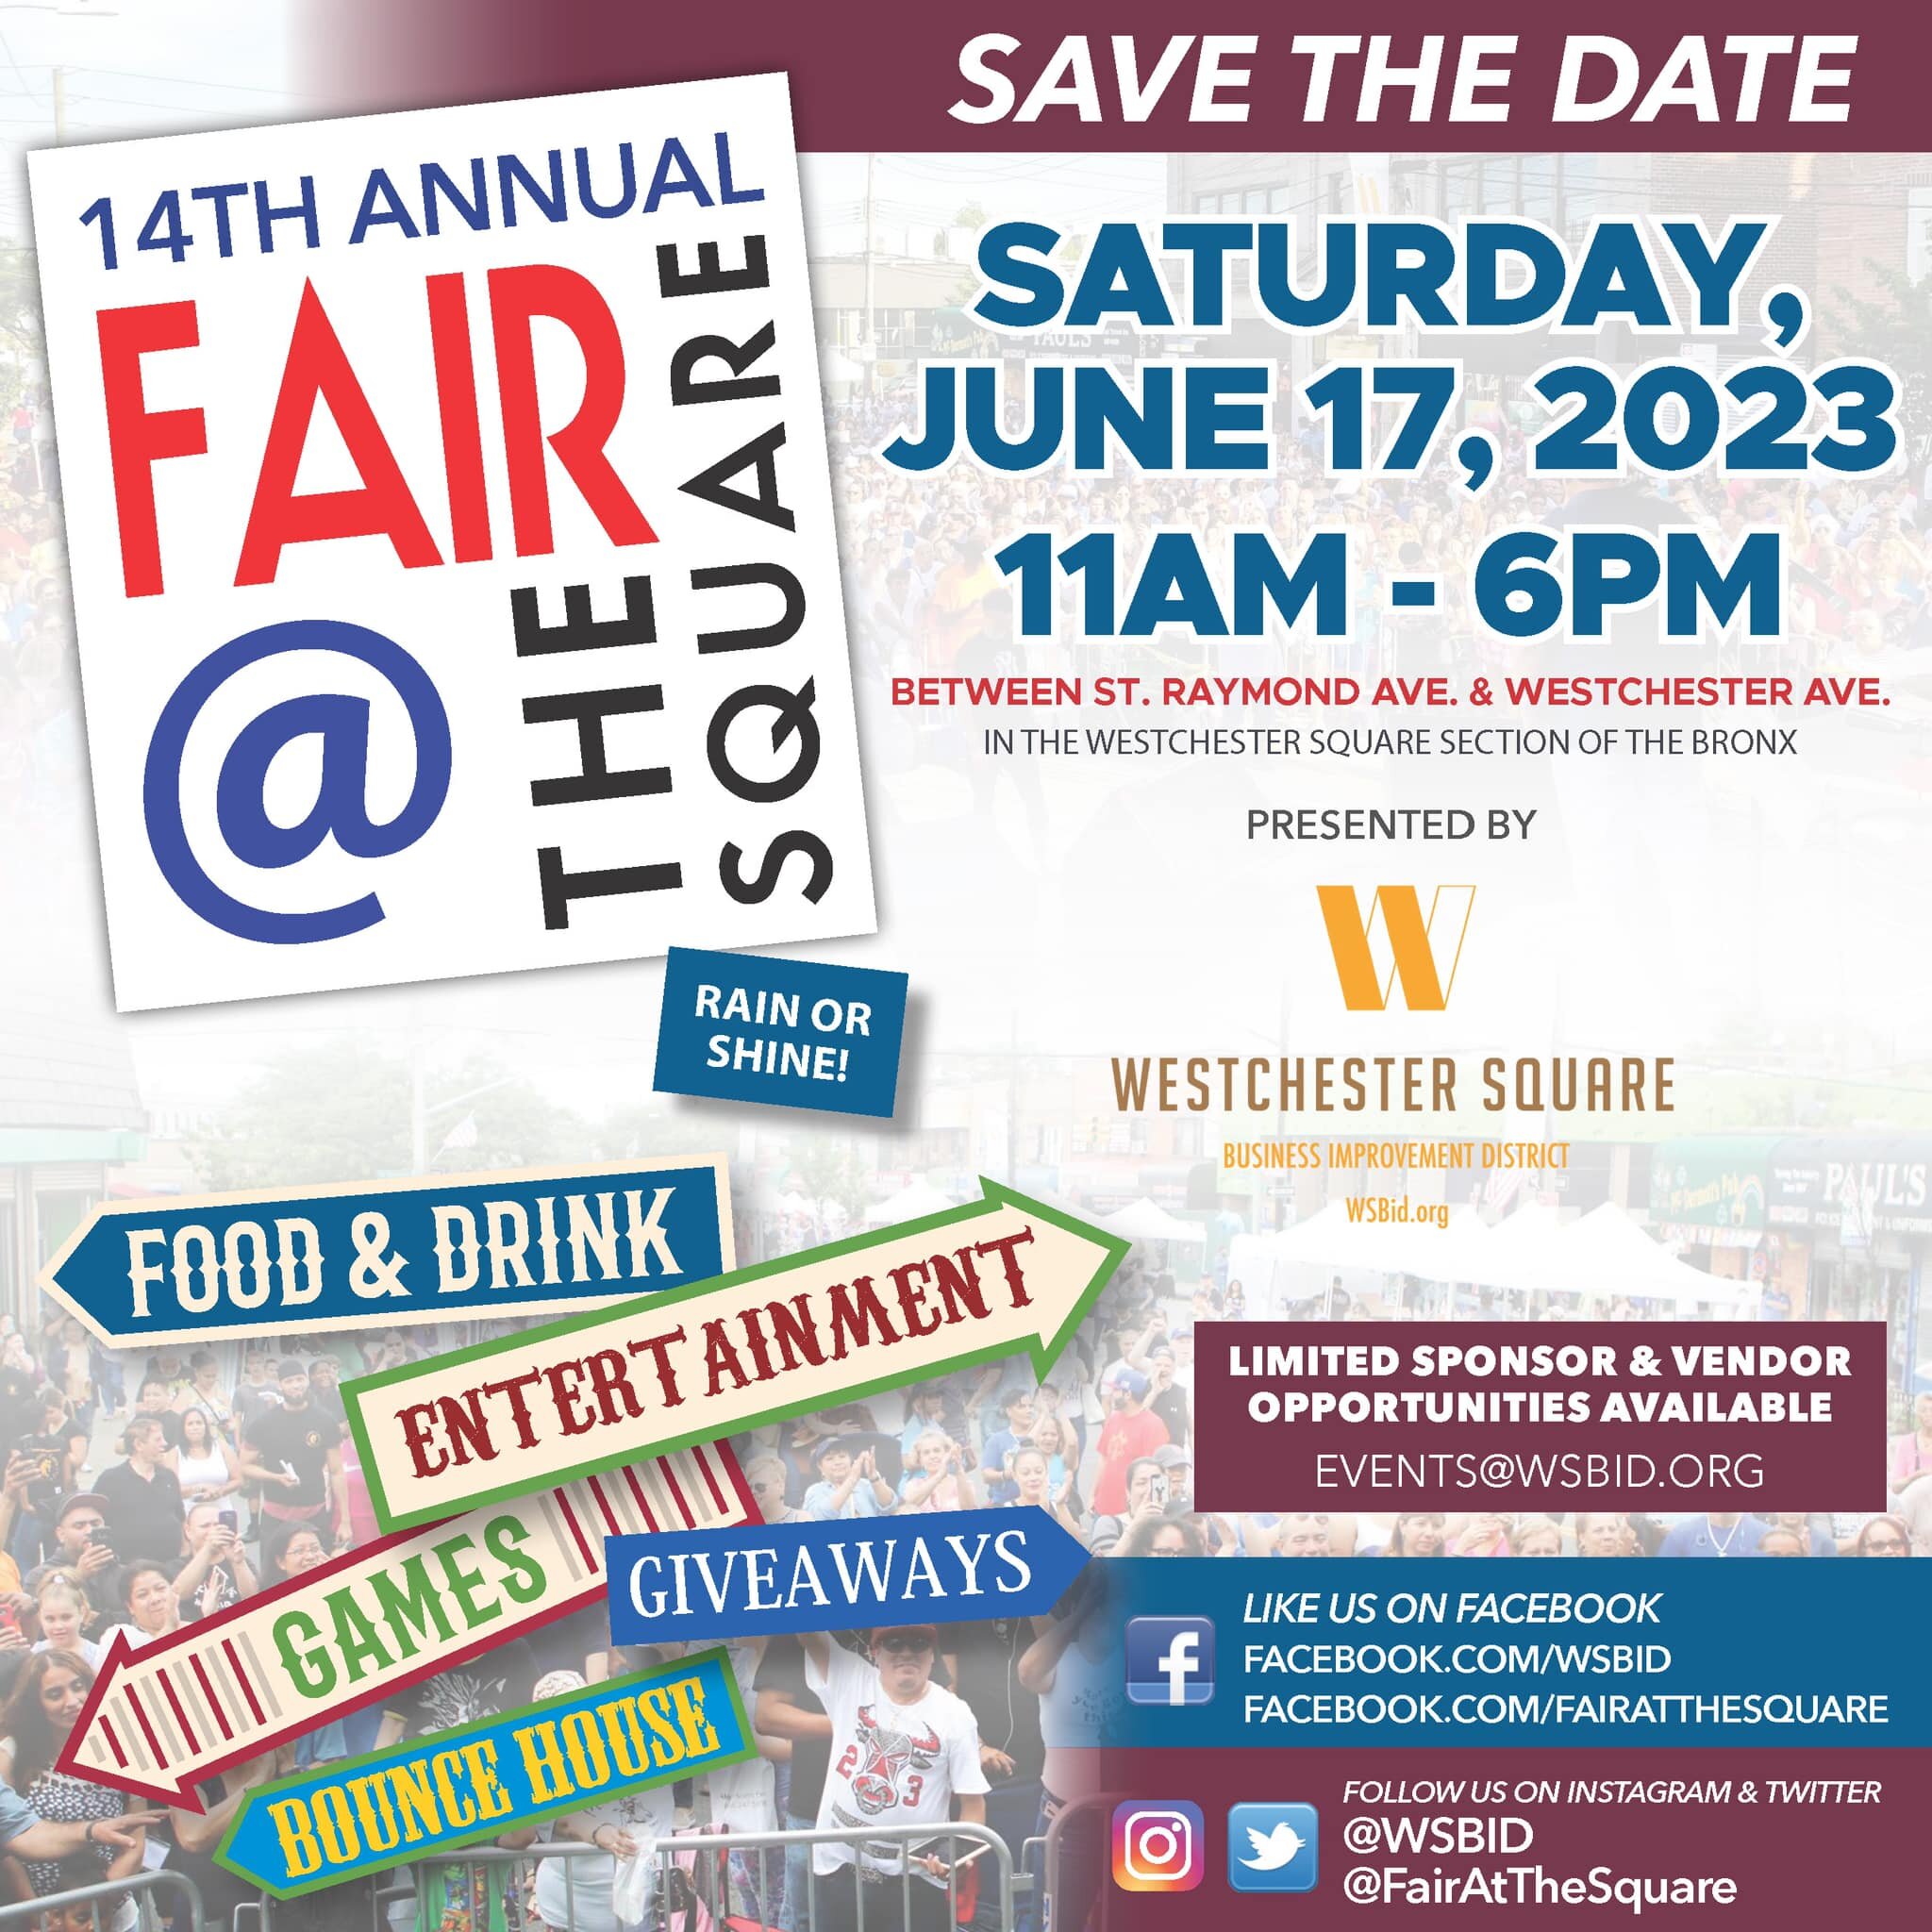 We&rsquo;re 1 month away from our annual @fairatthesquare !!! 🎉🎉

Be sure to mark your calendars for some family fun, food, and fantastic entertainment taking place on Saturday, June 17th here in the square!